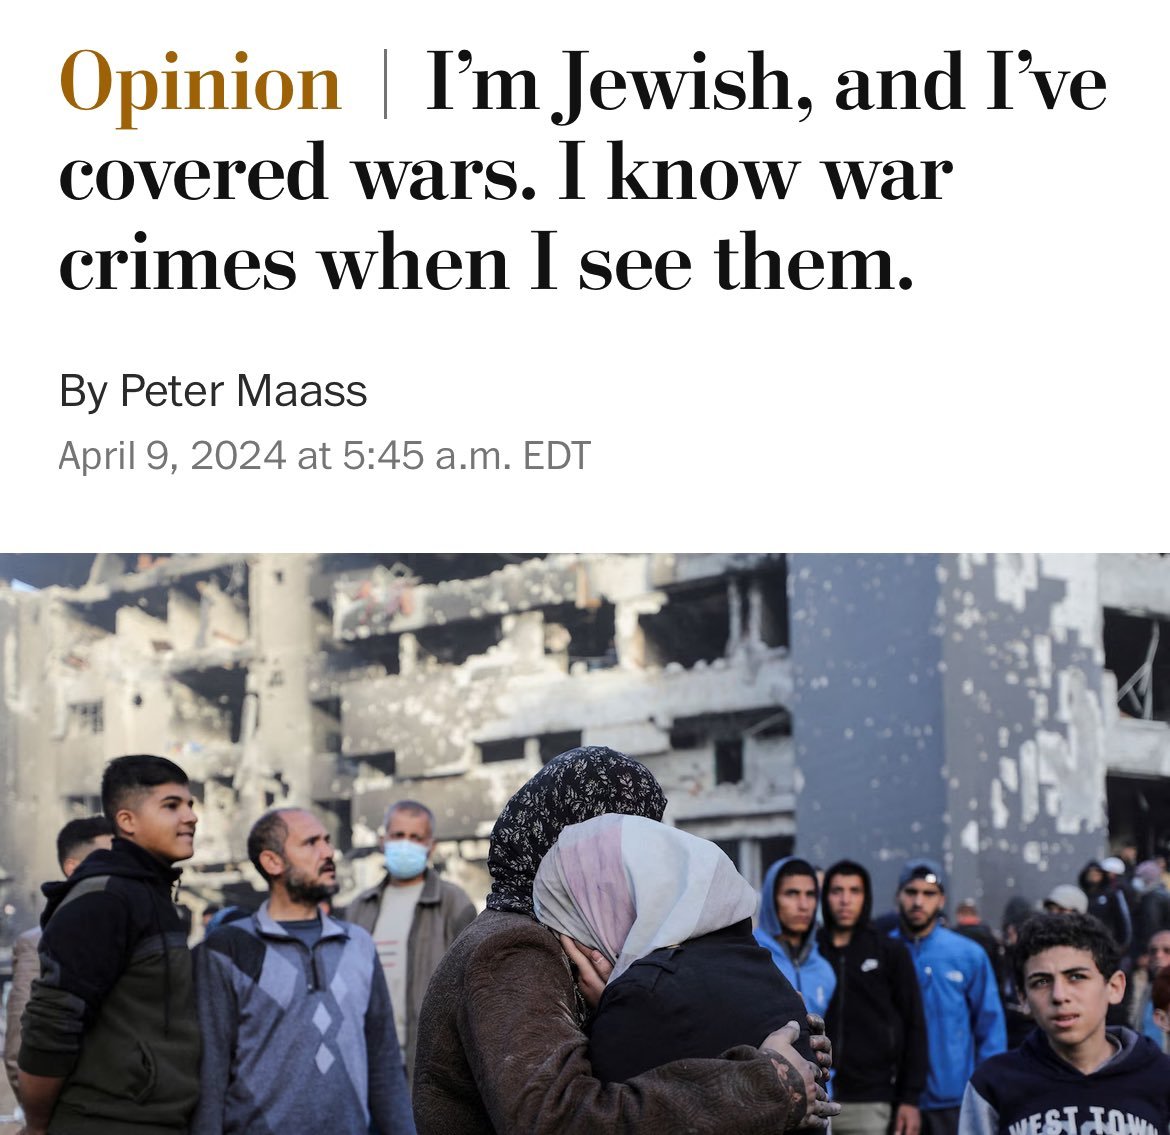 I'm Jewish, and I can read. I know a pitiful, Jew-hating excuse for journalism when I see it.